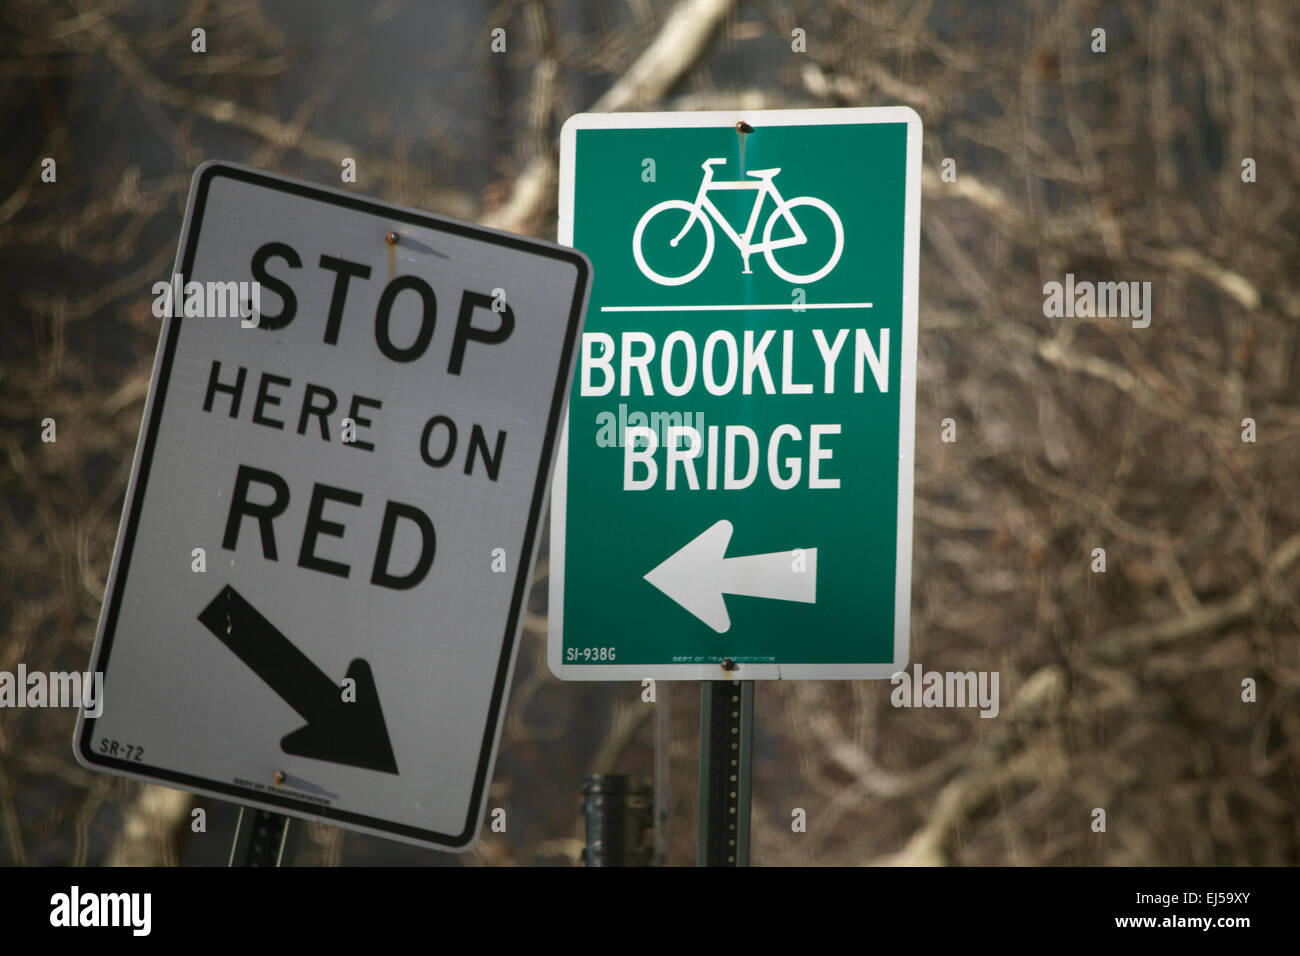 Sign directing to Brooklyn Bridge for bicycles, New York City, New York, USA Stock Photo